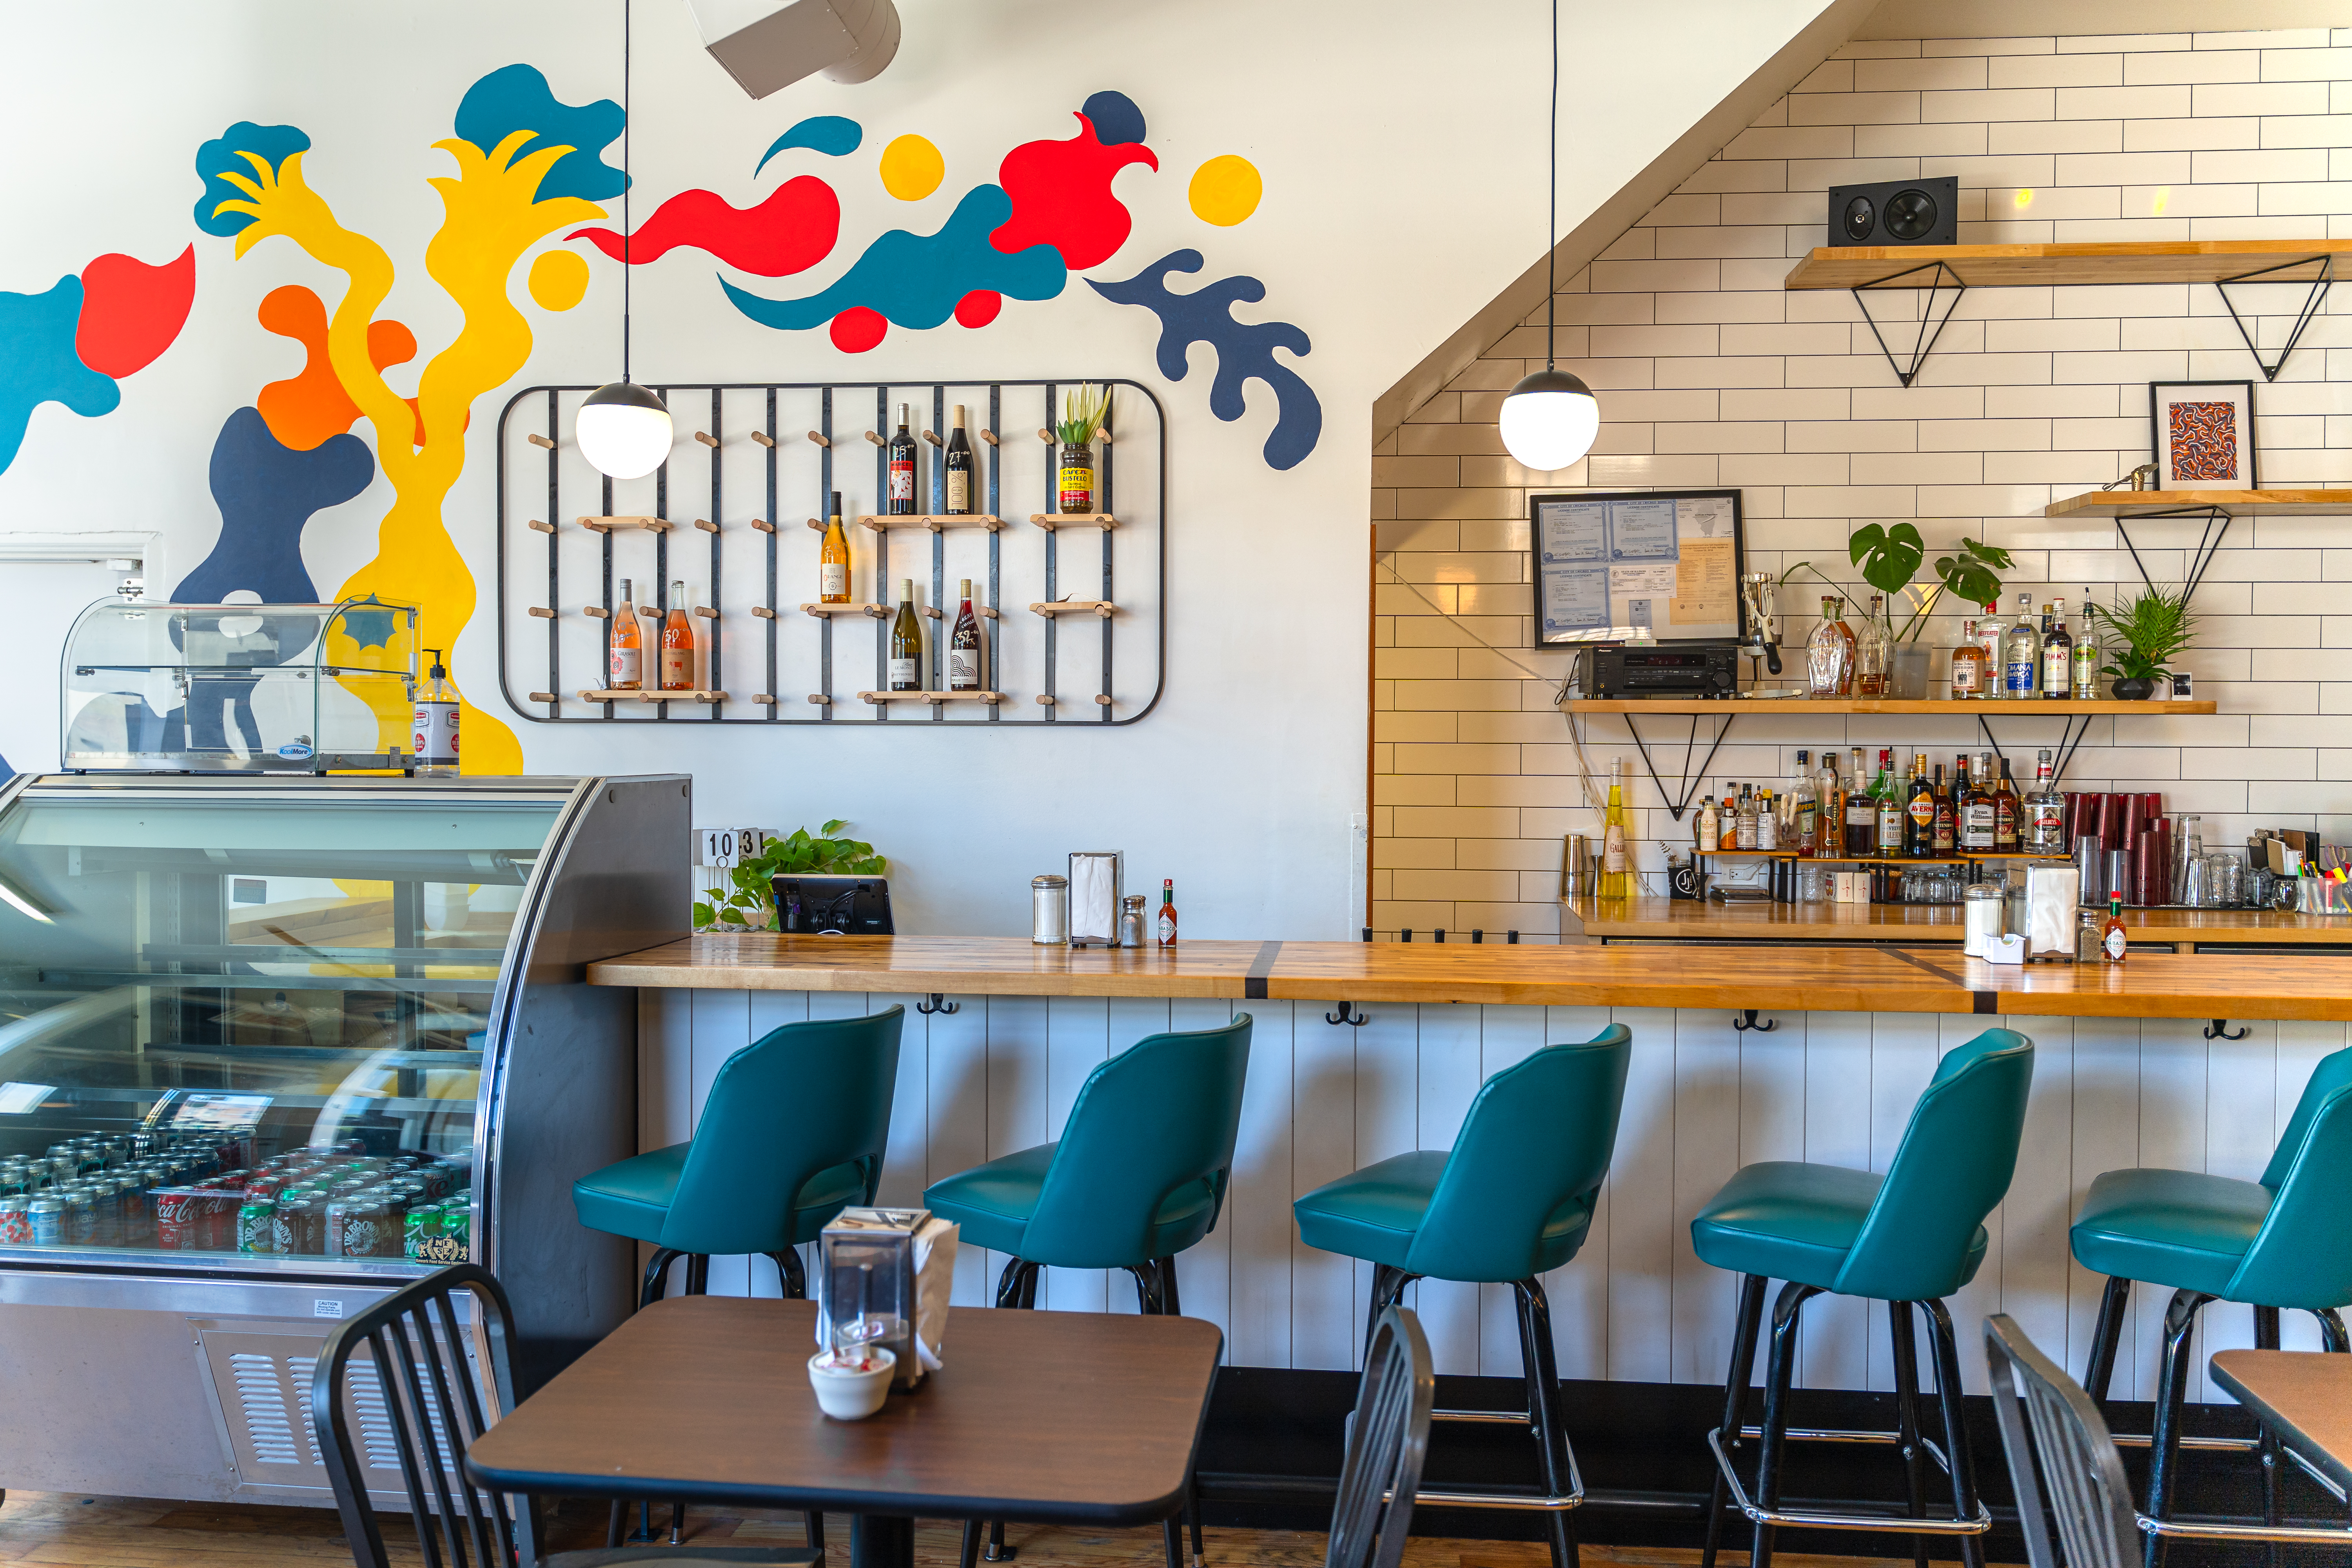 A white restaurant space with a diner counter lined by teal stools. A colorful, abstract mural is painted on one wall.